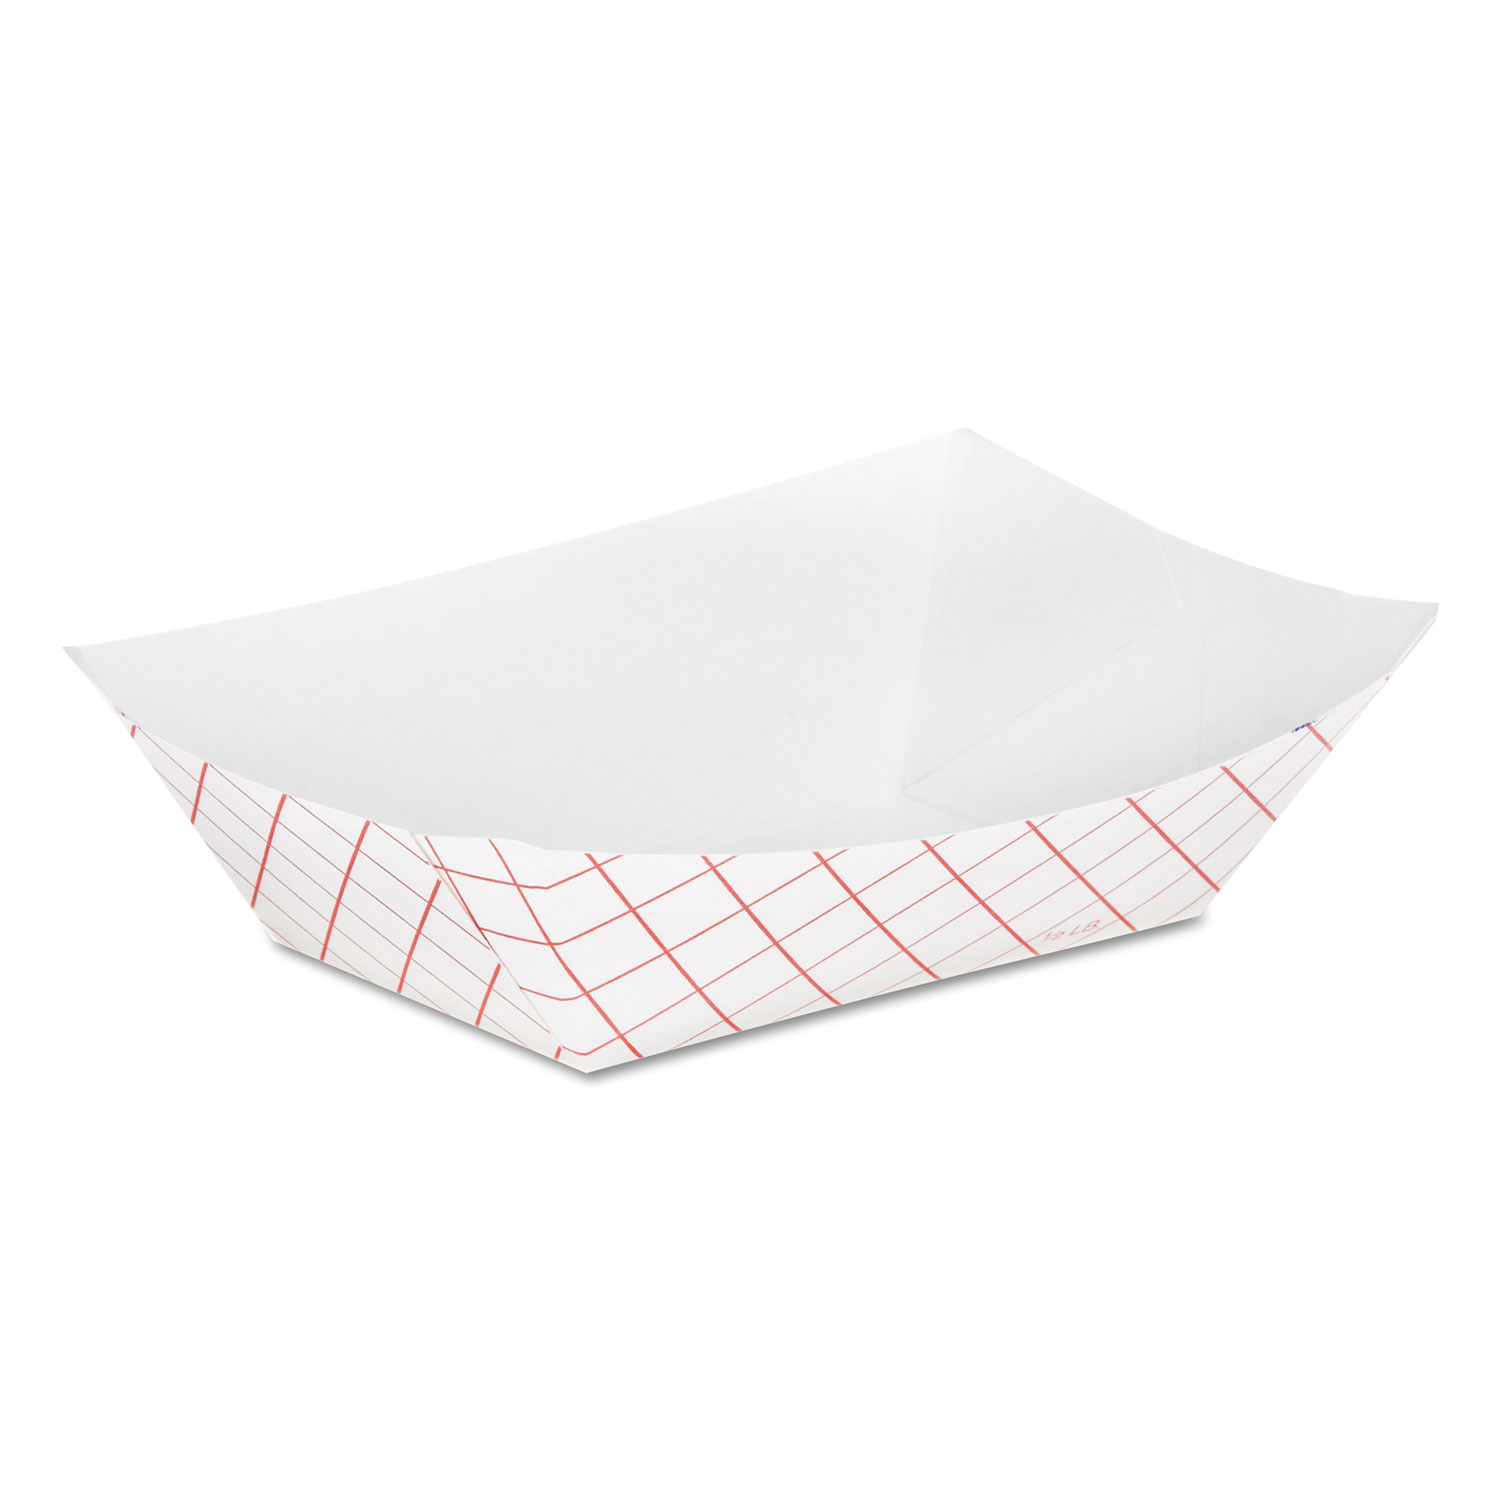  Dixie RP50 Kant Leek Clay-Coated Paper Food Tray, 0.5 lb Capacity, 5.3 x 3.75 x 1.4, Red Plaid, 1,000/Carton (DXERP50) 